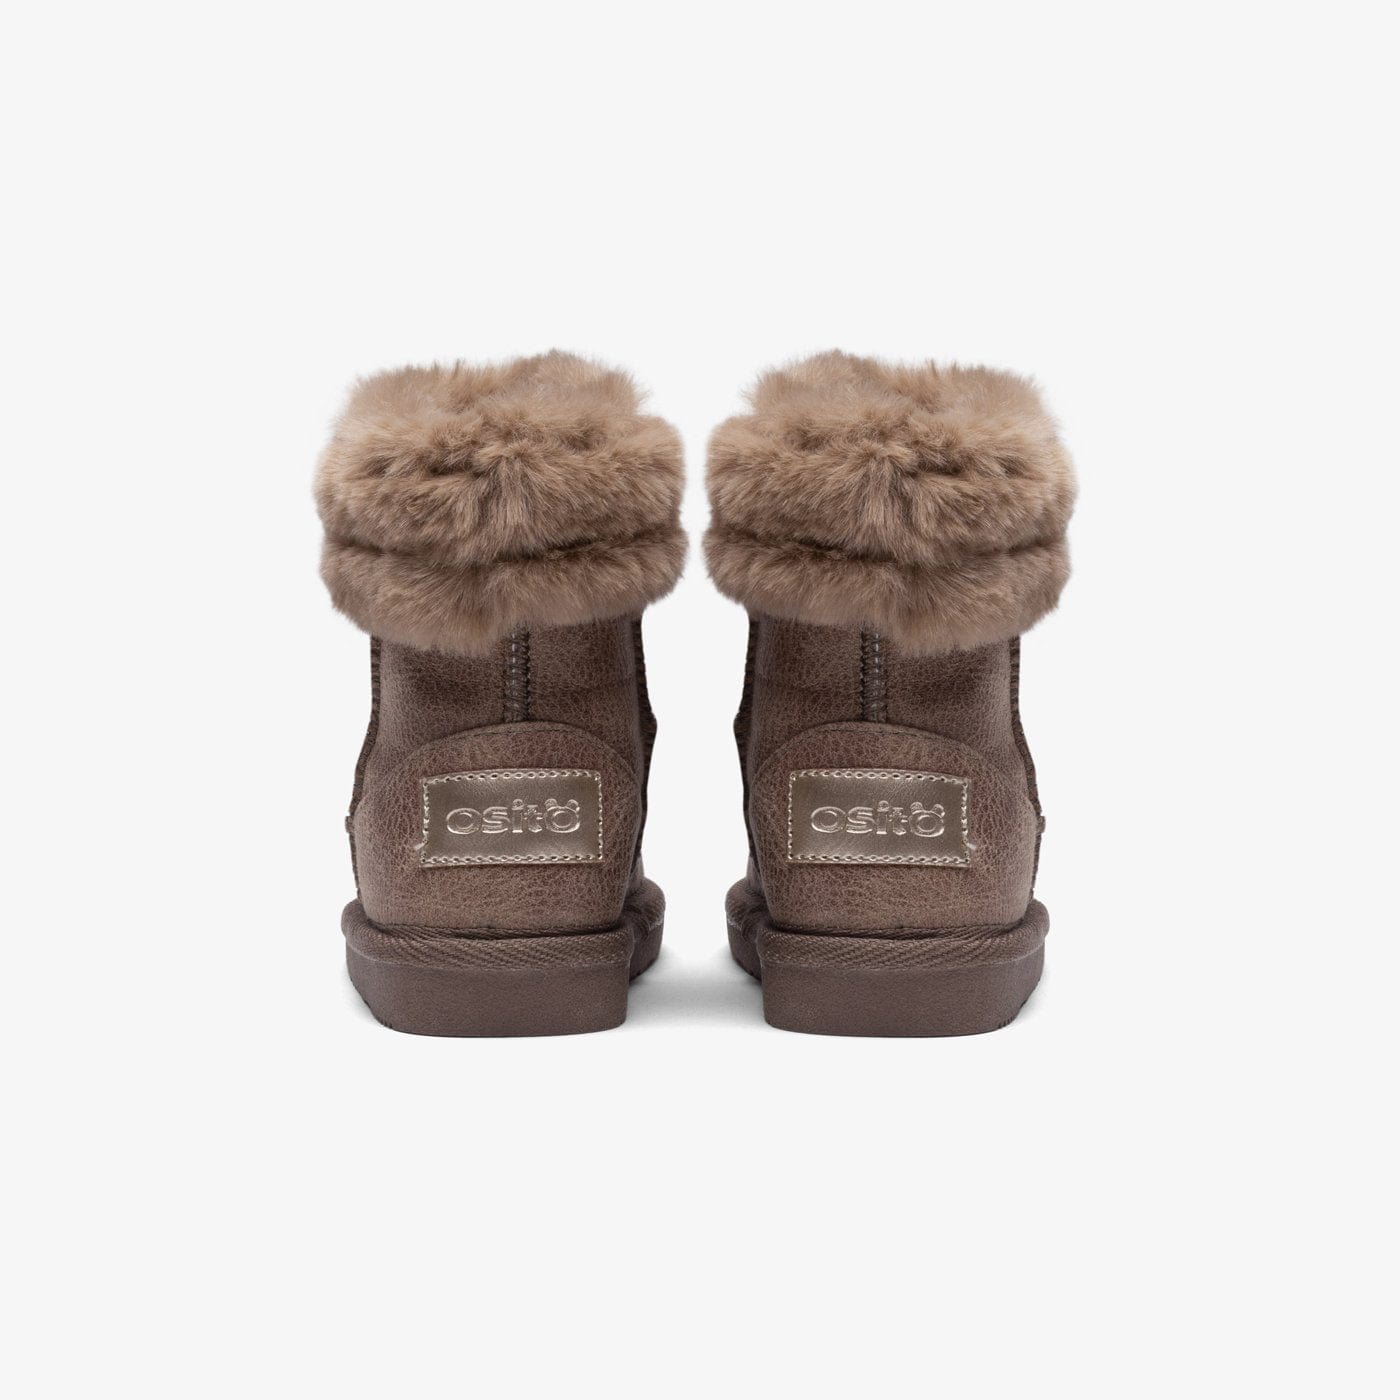 OSITO Shoes Baby's Taupe Fur Australian Boots